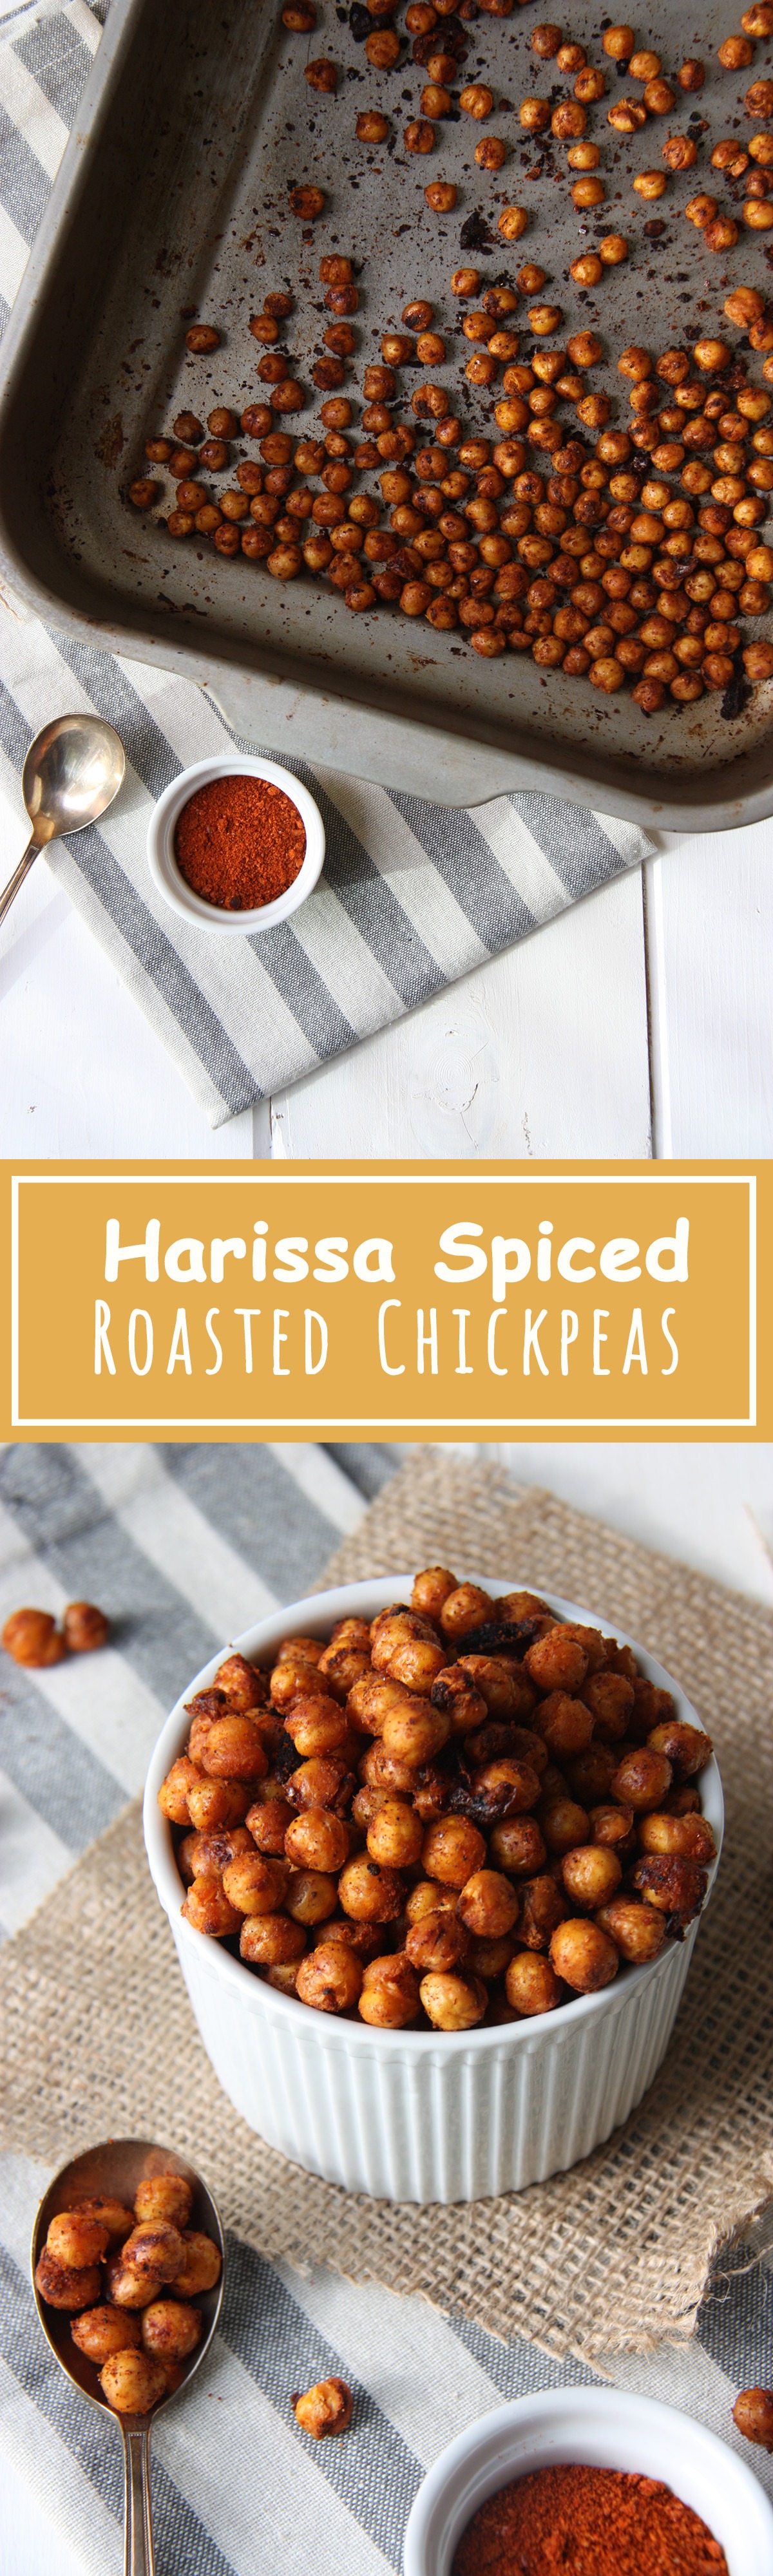 Harissa Spiced Chickpeas - these are the perfect savoury snack, and so easy to make! www.thehomecookskitchen.com